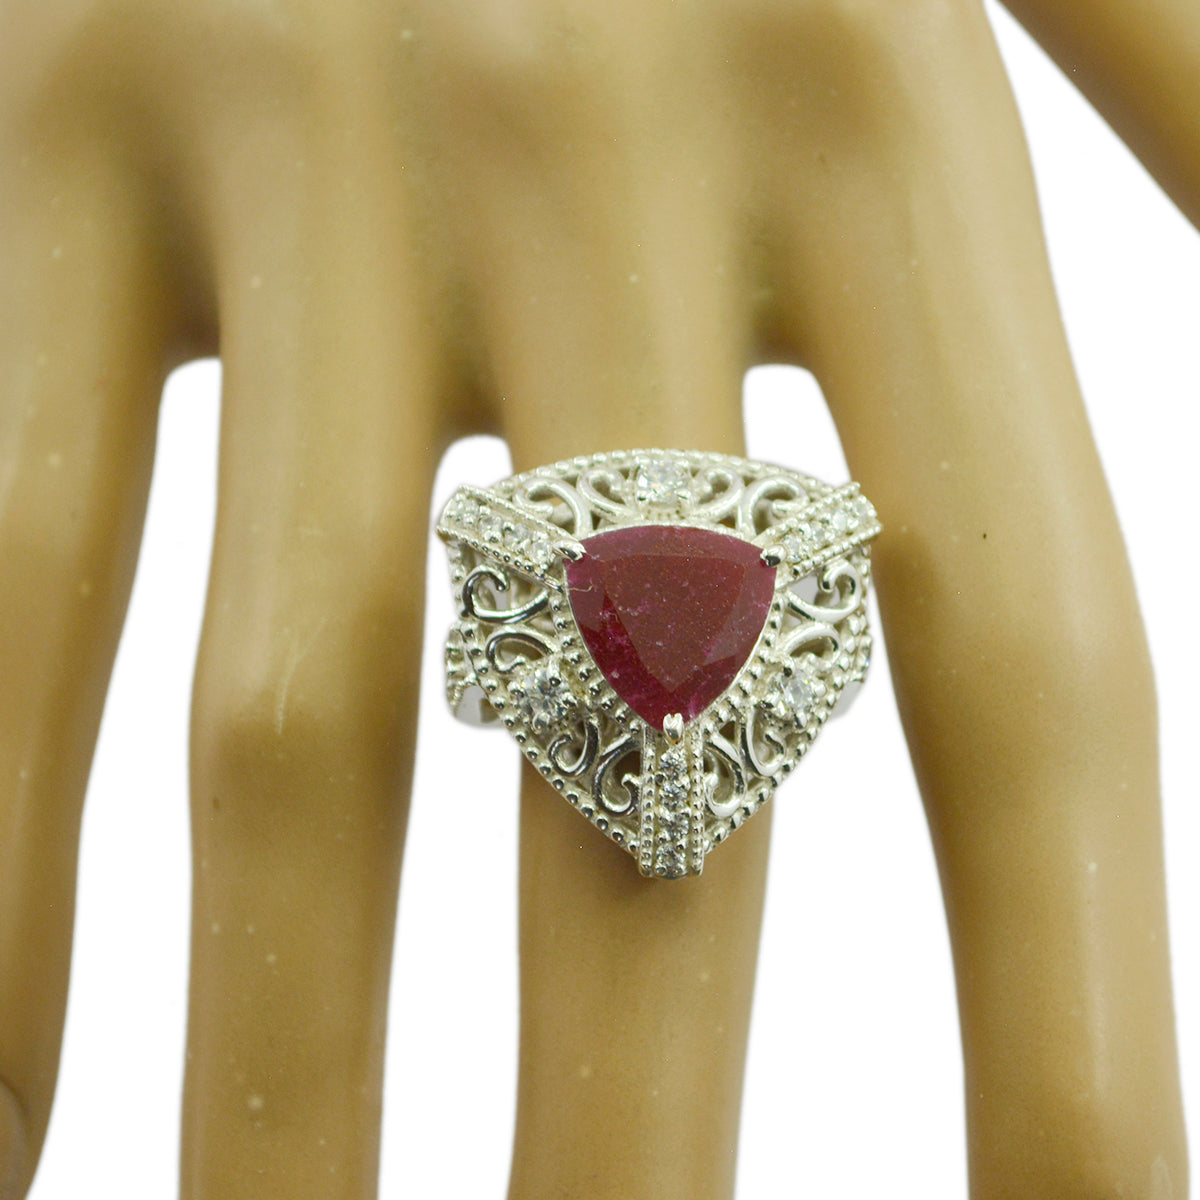 Riyo Refined Stone Indianruby 925 Sterling Silver Ring Jewelry Scale